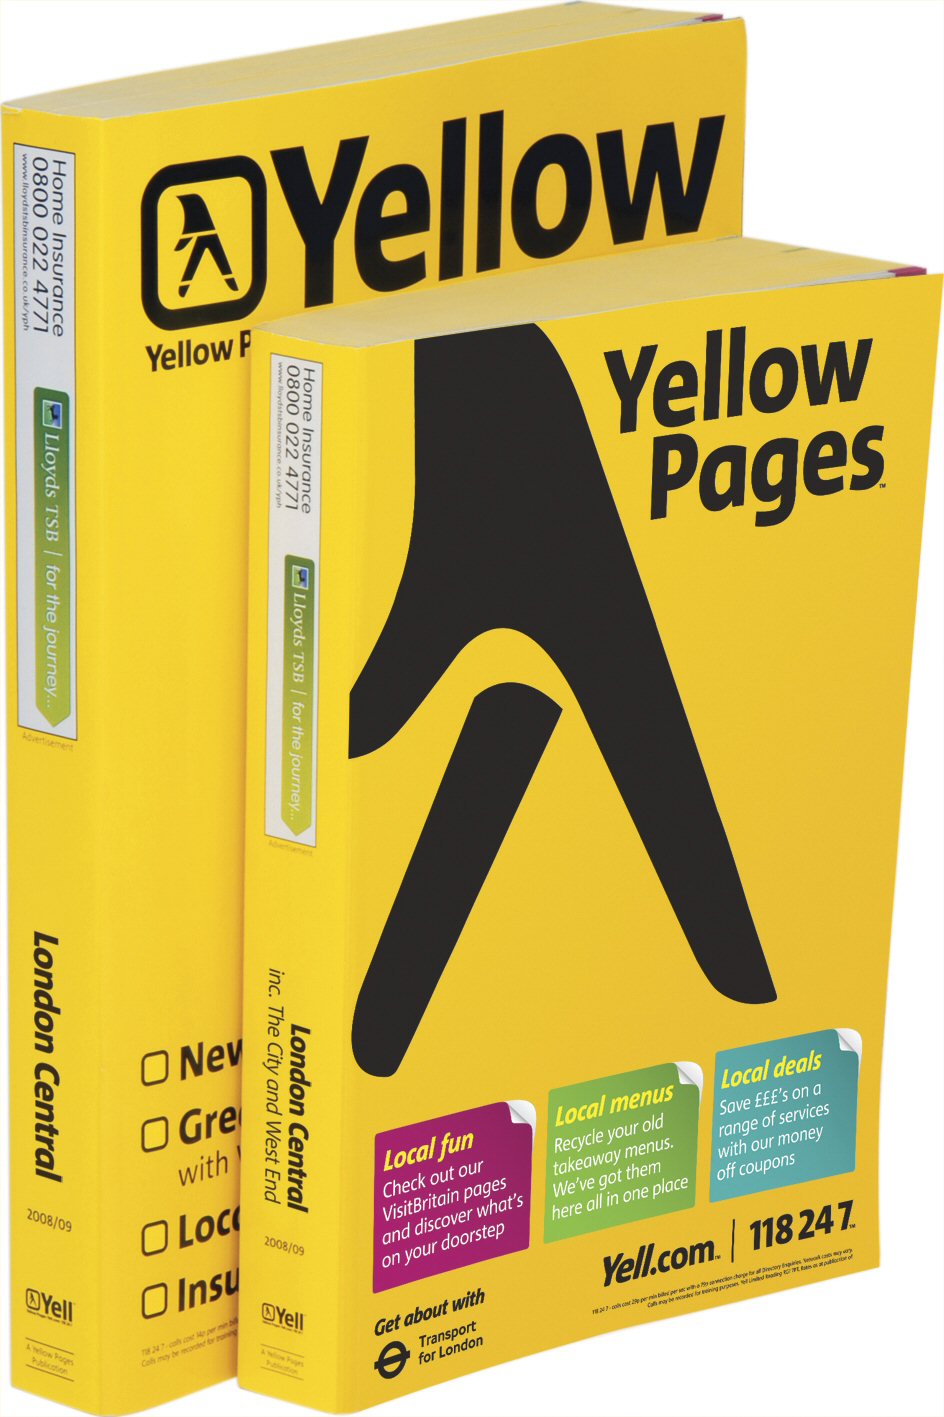 Th huns yellow pages